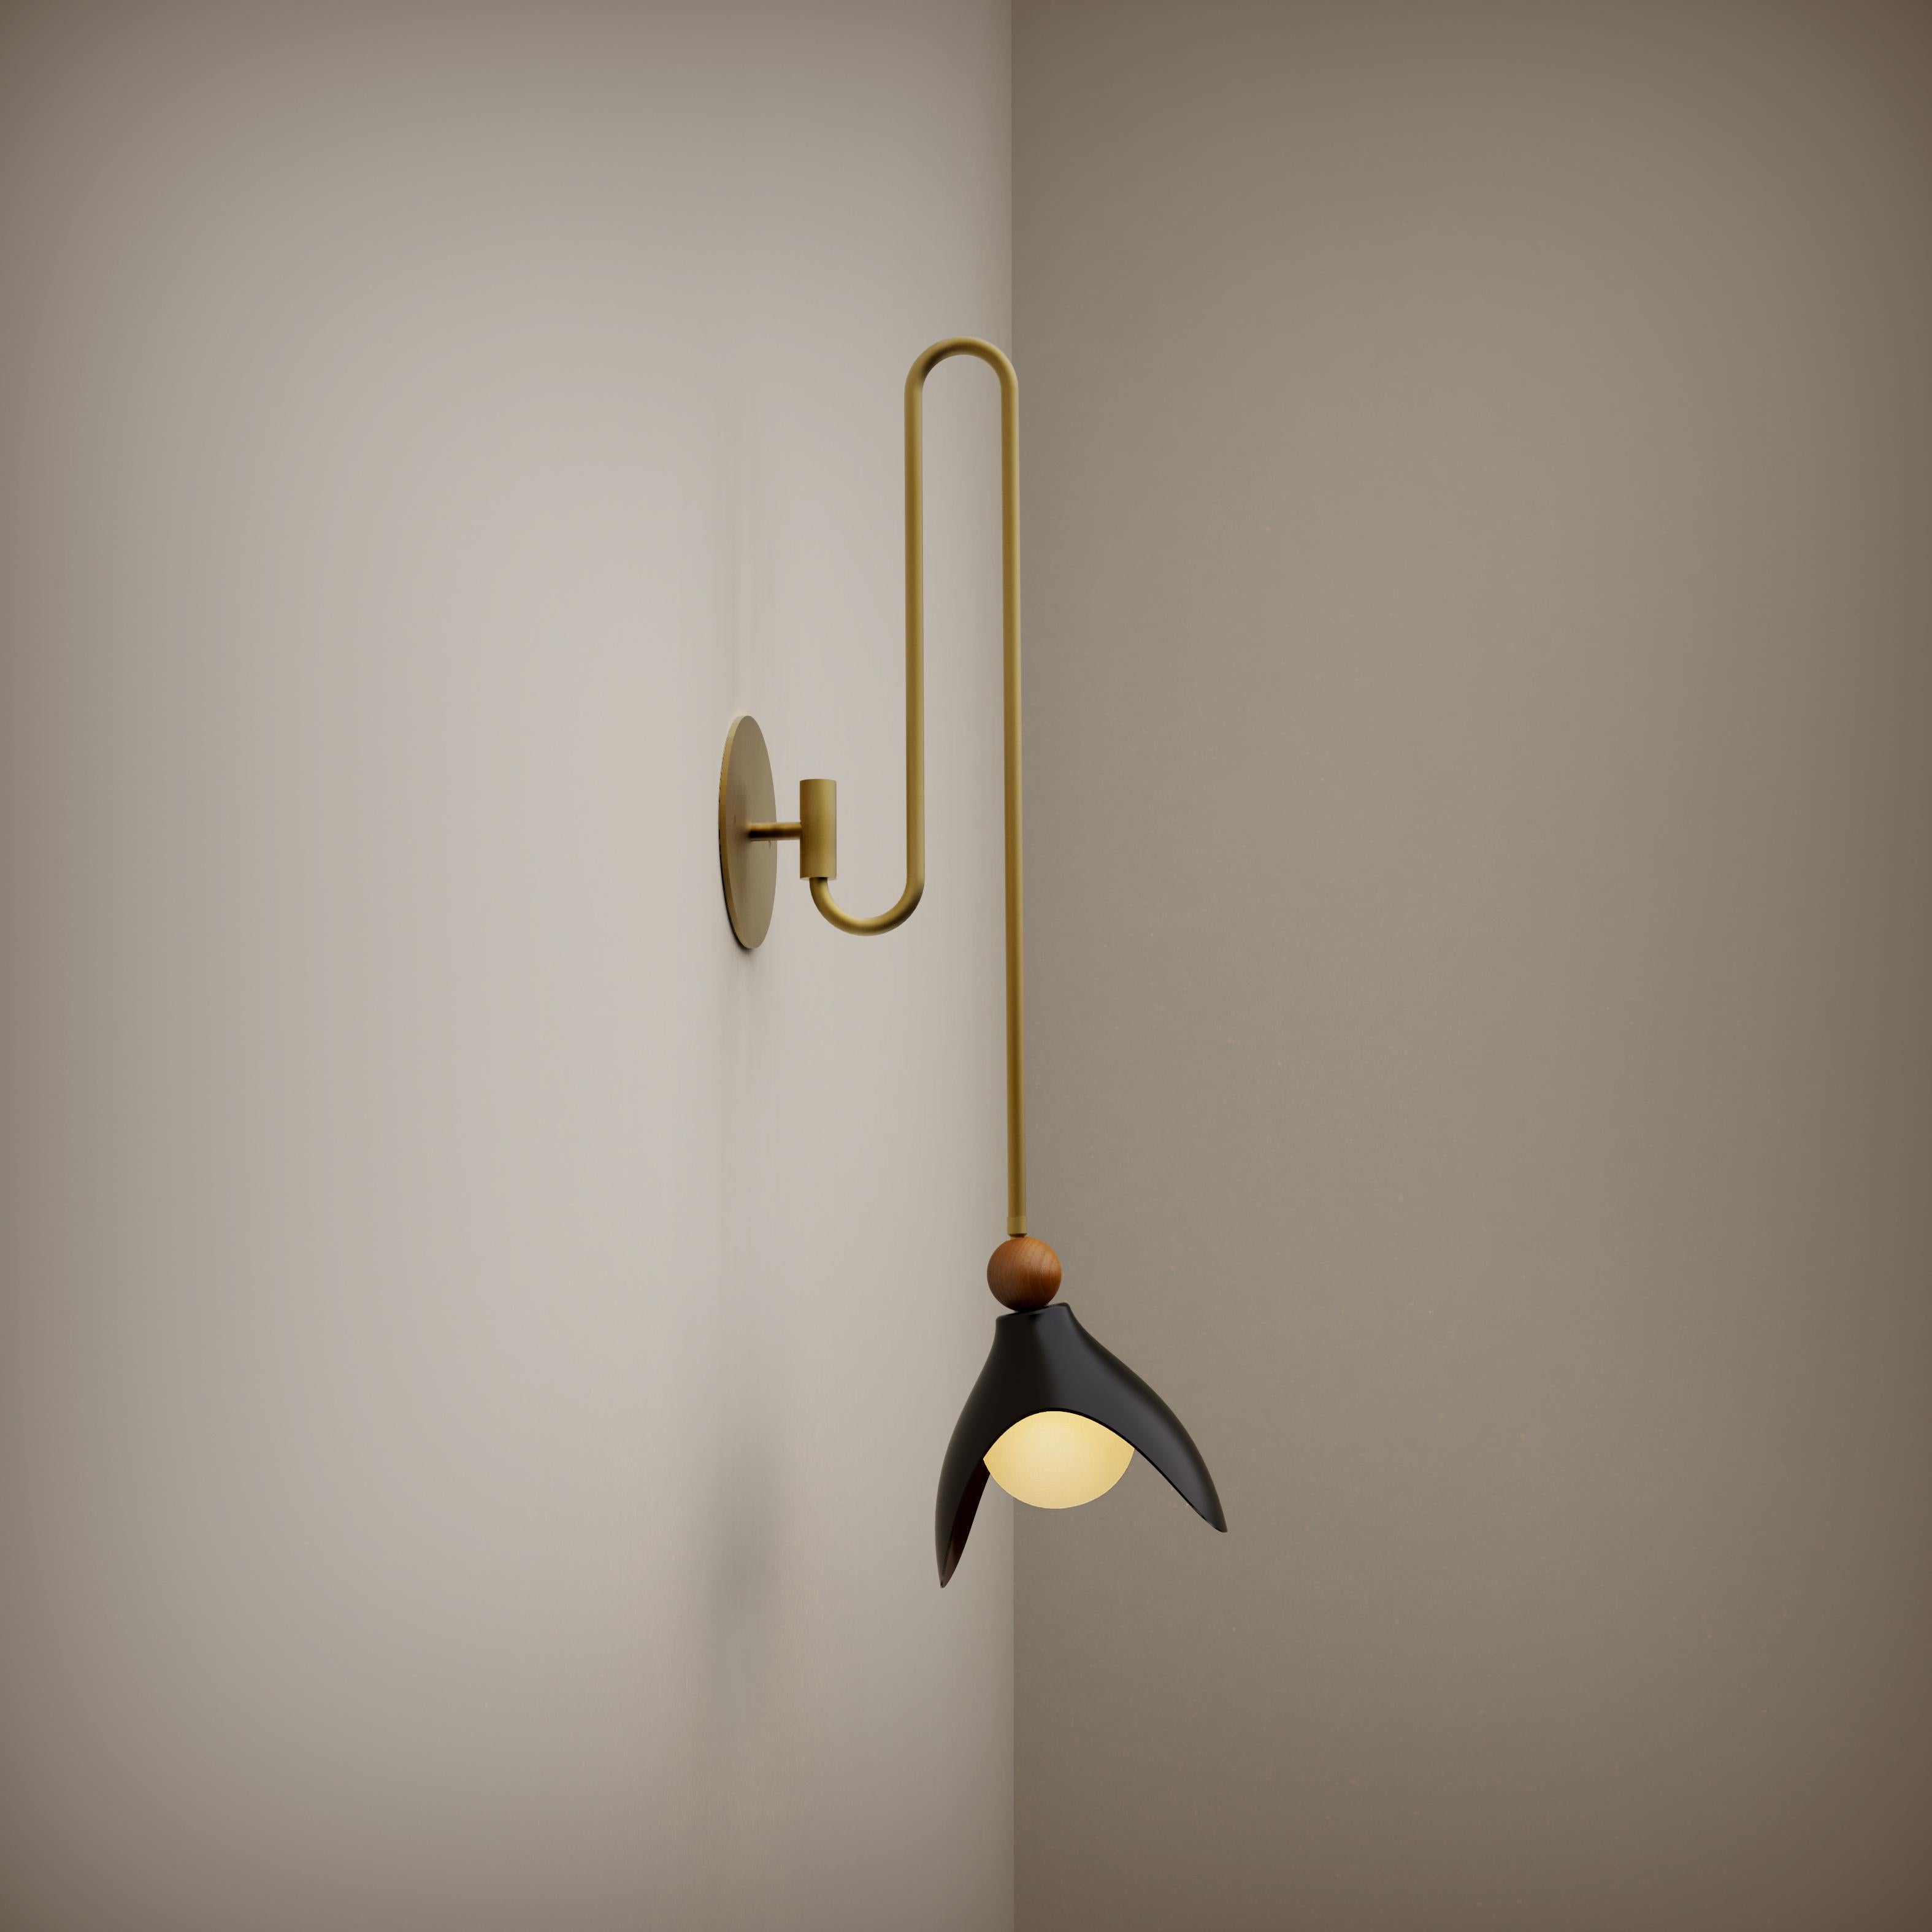 American LILY Wall Sconce in Enamel, Brass & Walnut, Ginger Curtis x Blueprint Lighting For Sale